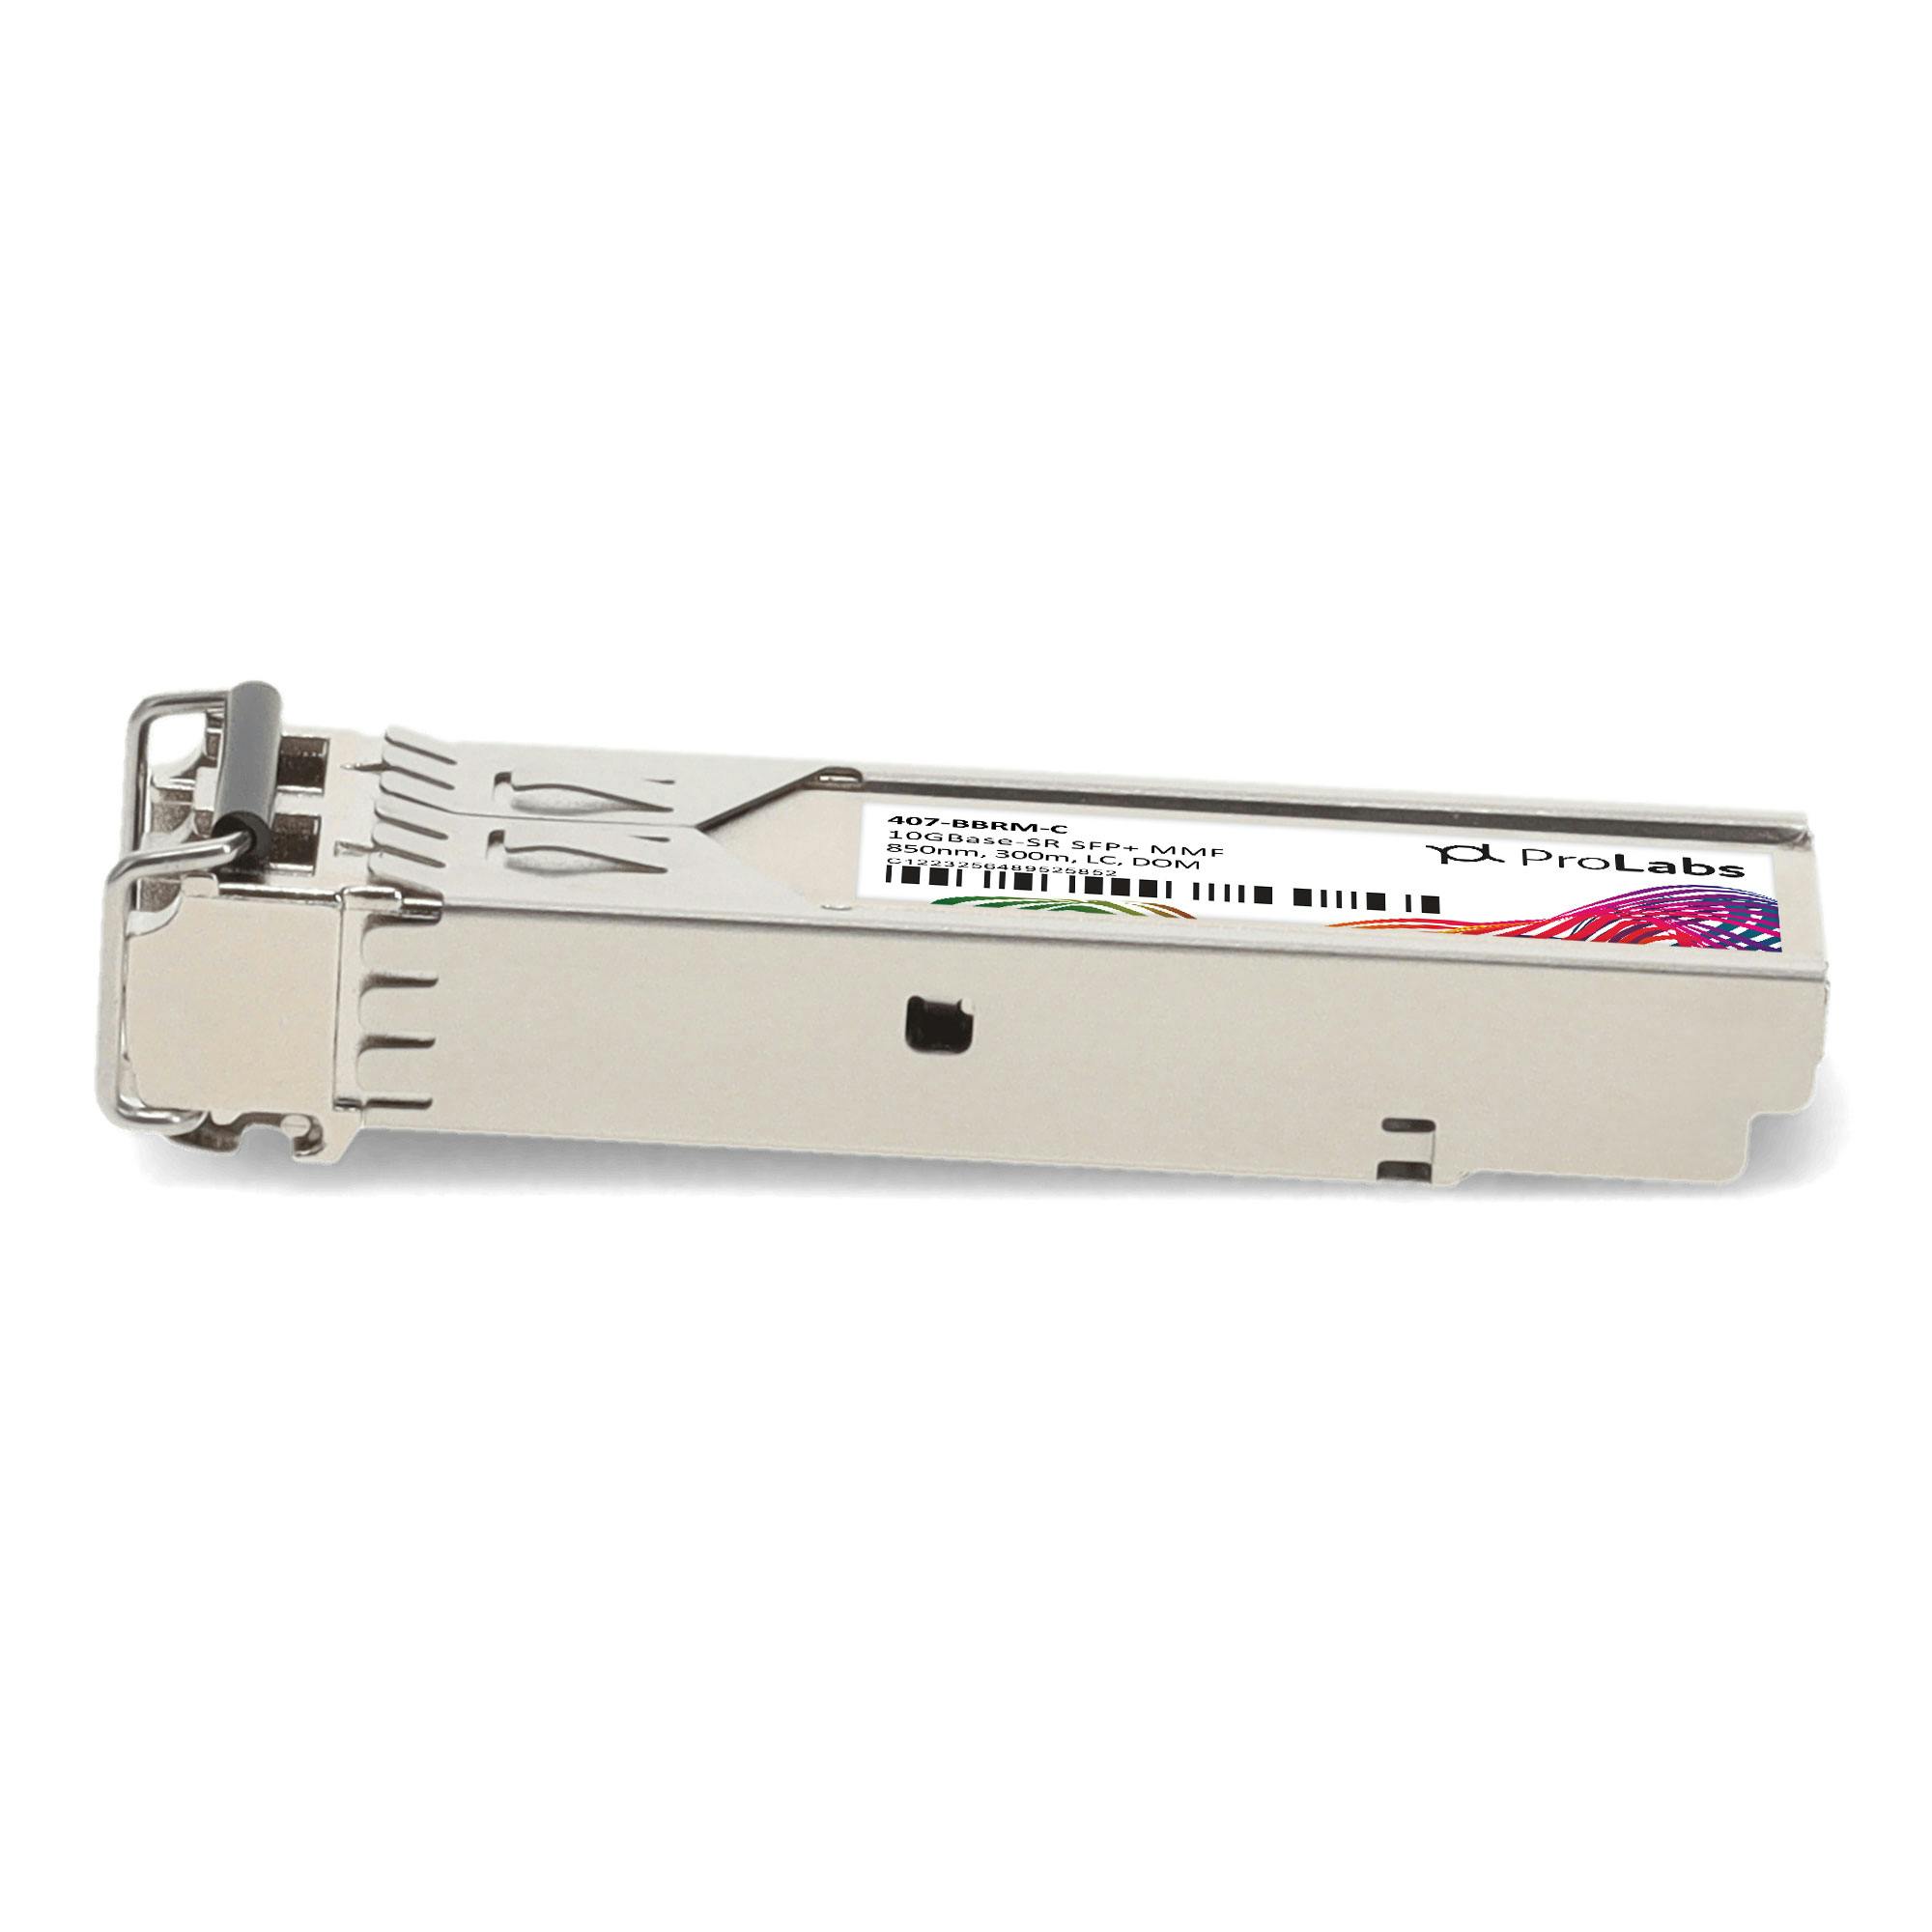 10GBase-SR 300m for Dell PowerConnect M6348 Compatible 407-BBRM SFP